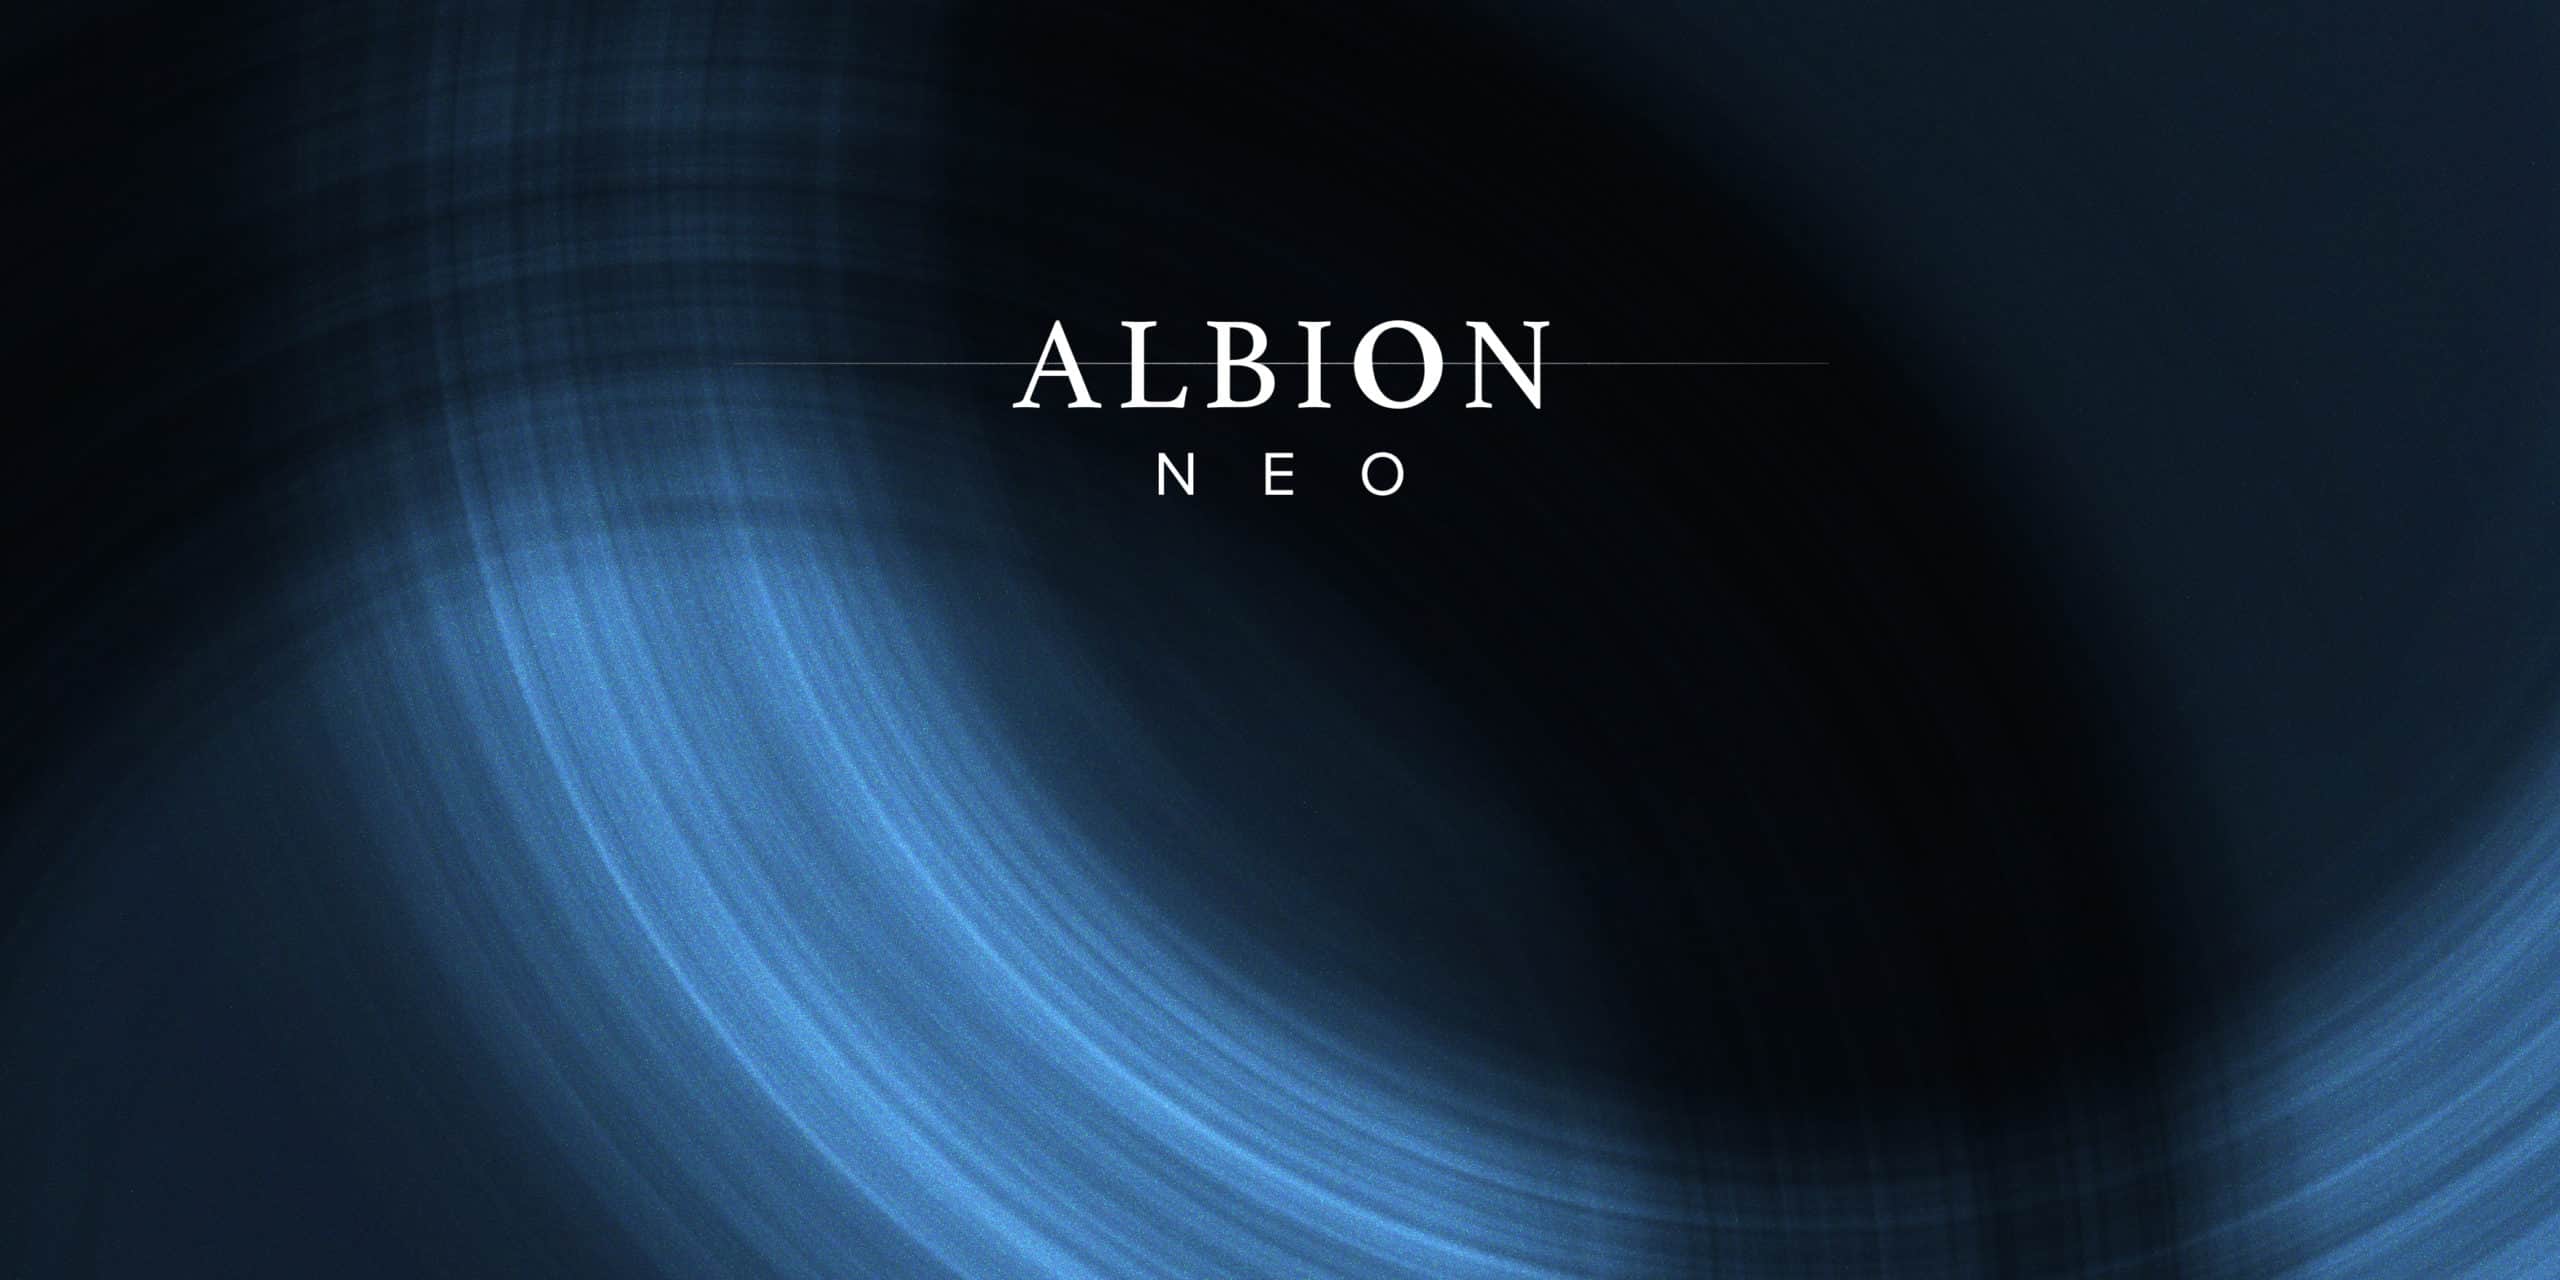 Albion neo – available now!